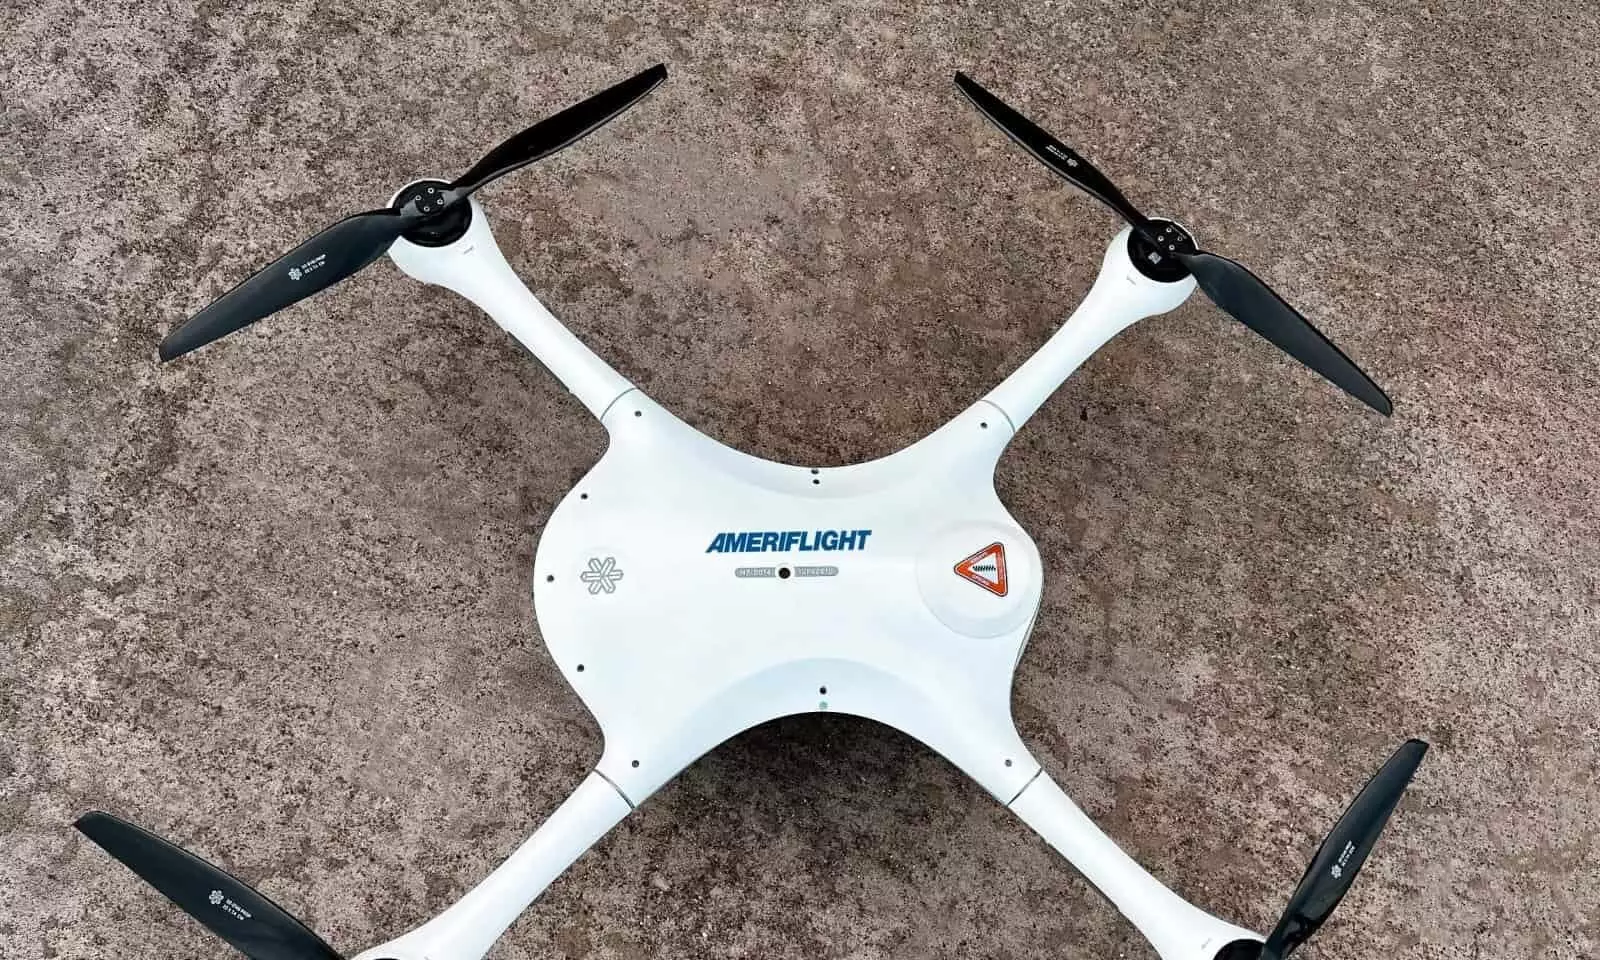 Ameriflight gets FAA approval to operate Matternet M2 drone